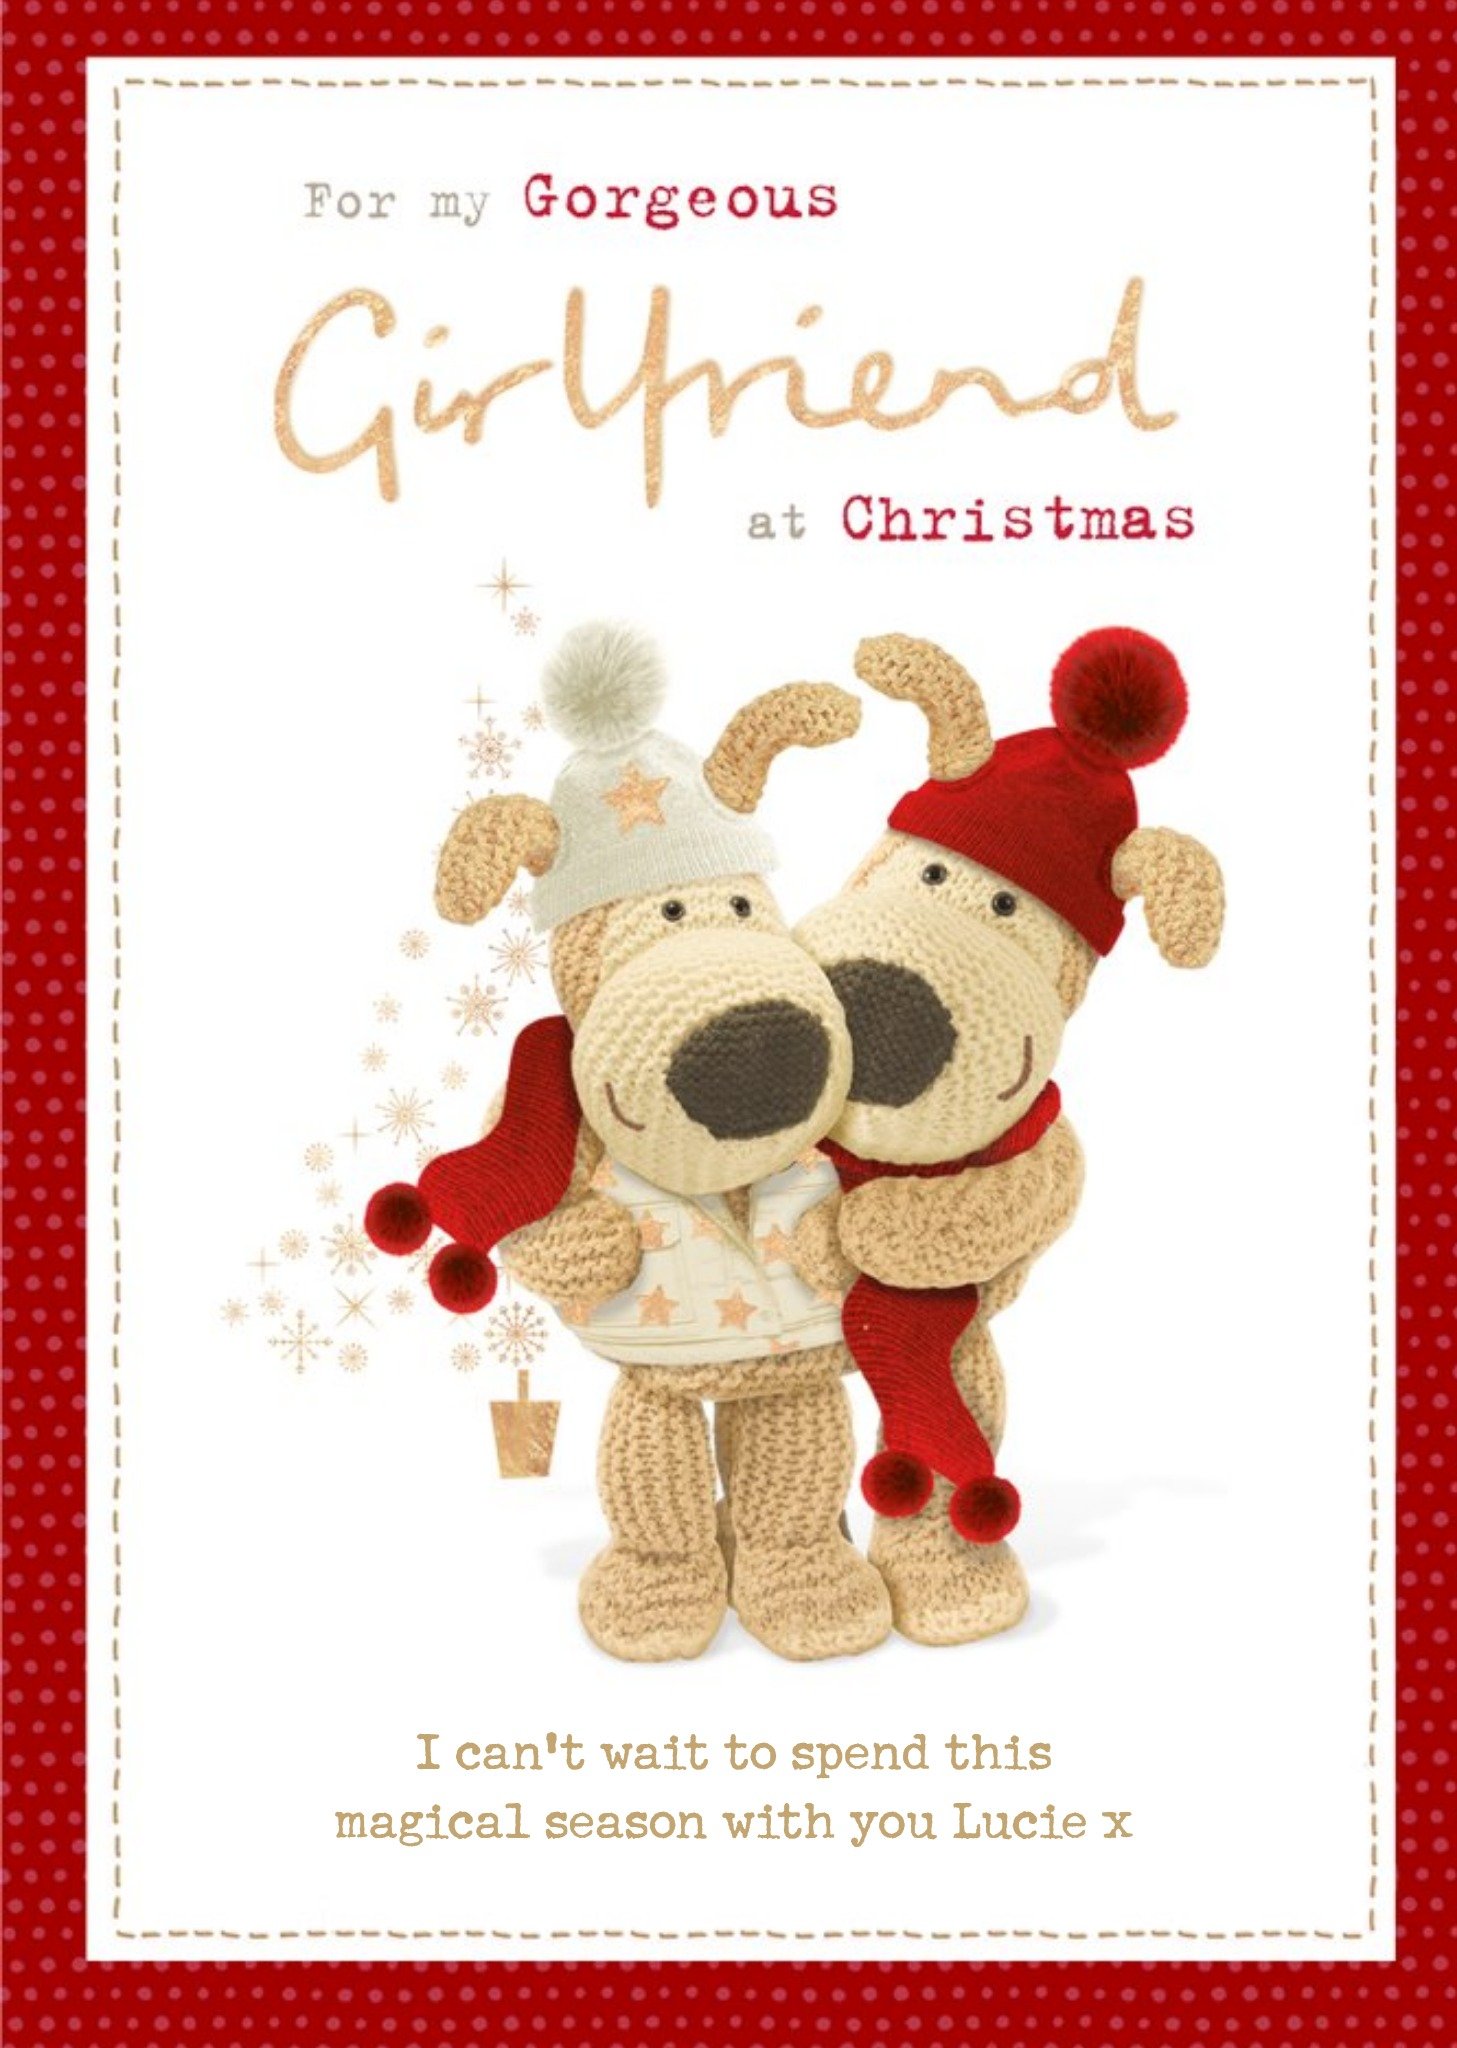 Boofle Cute Christmas Card For My Gorgeous Grilfriend, Large